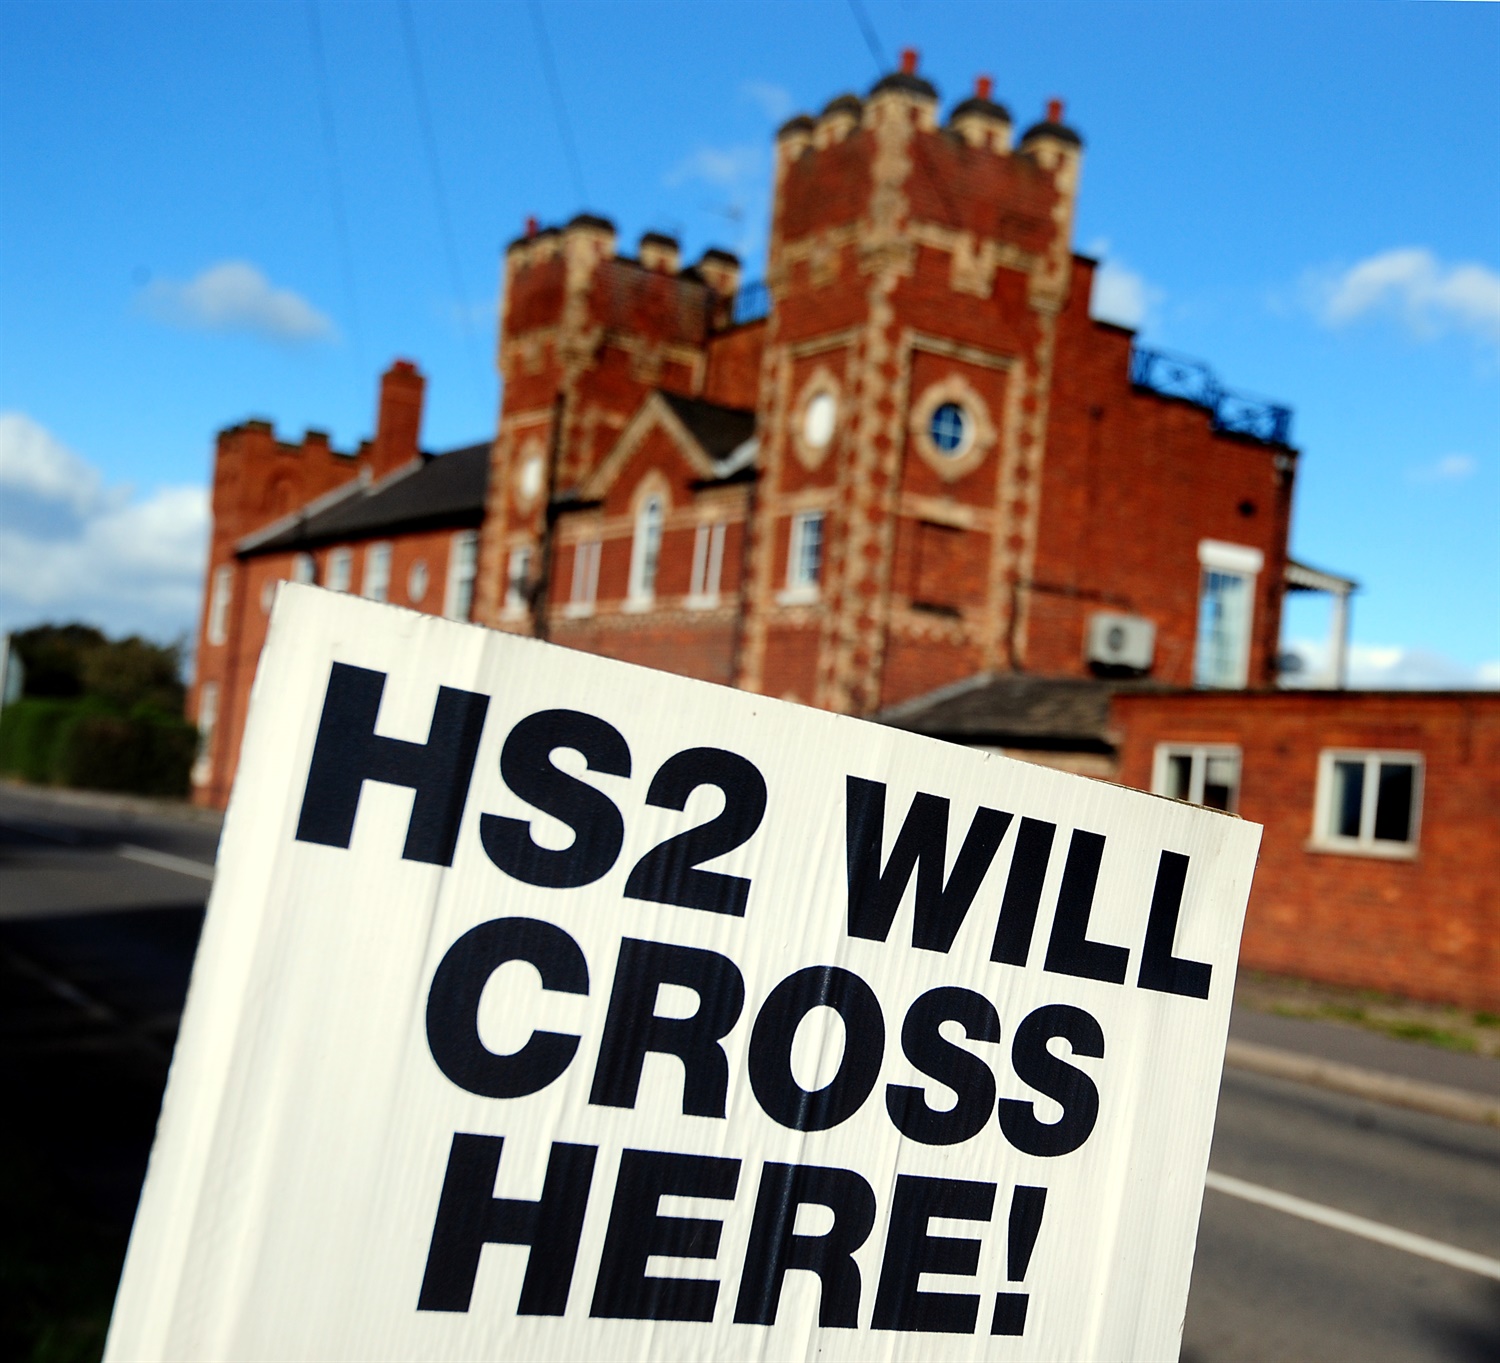 Over 14,000 jobs ‘would be lost if HS2 is cancelled’